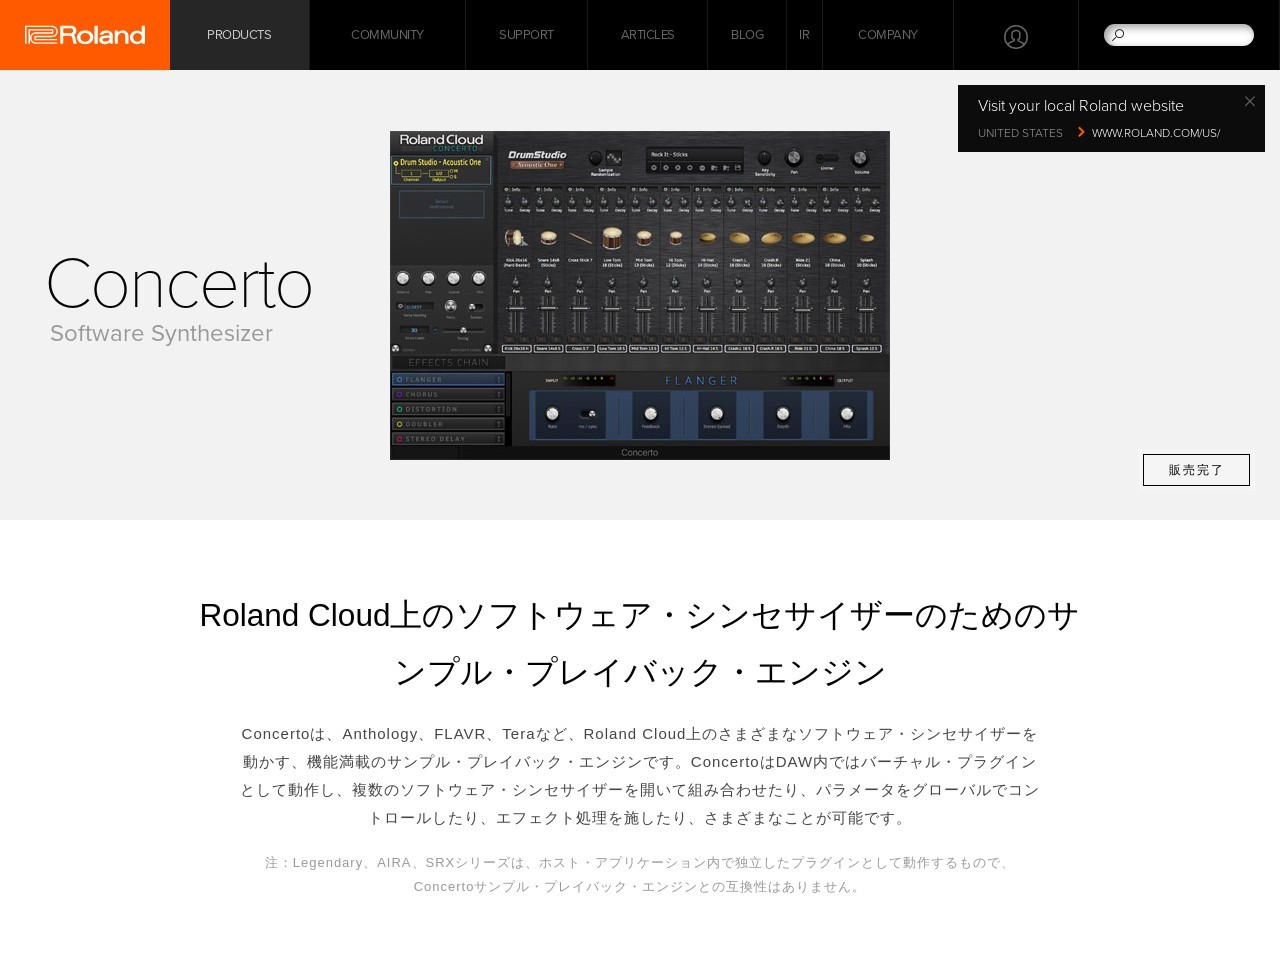 Roland - Concerto | Software Synthesizer